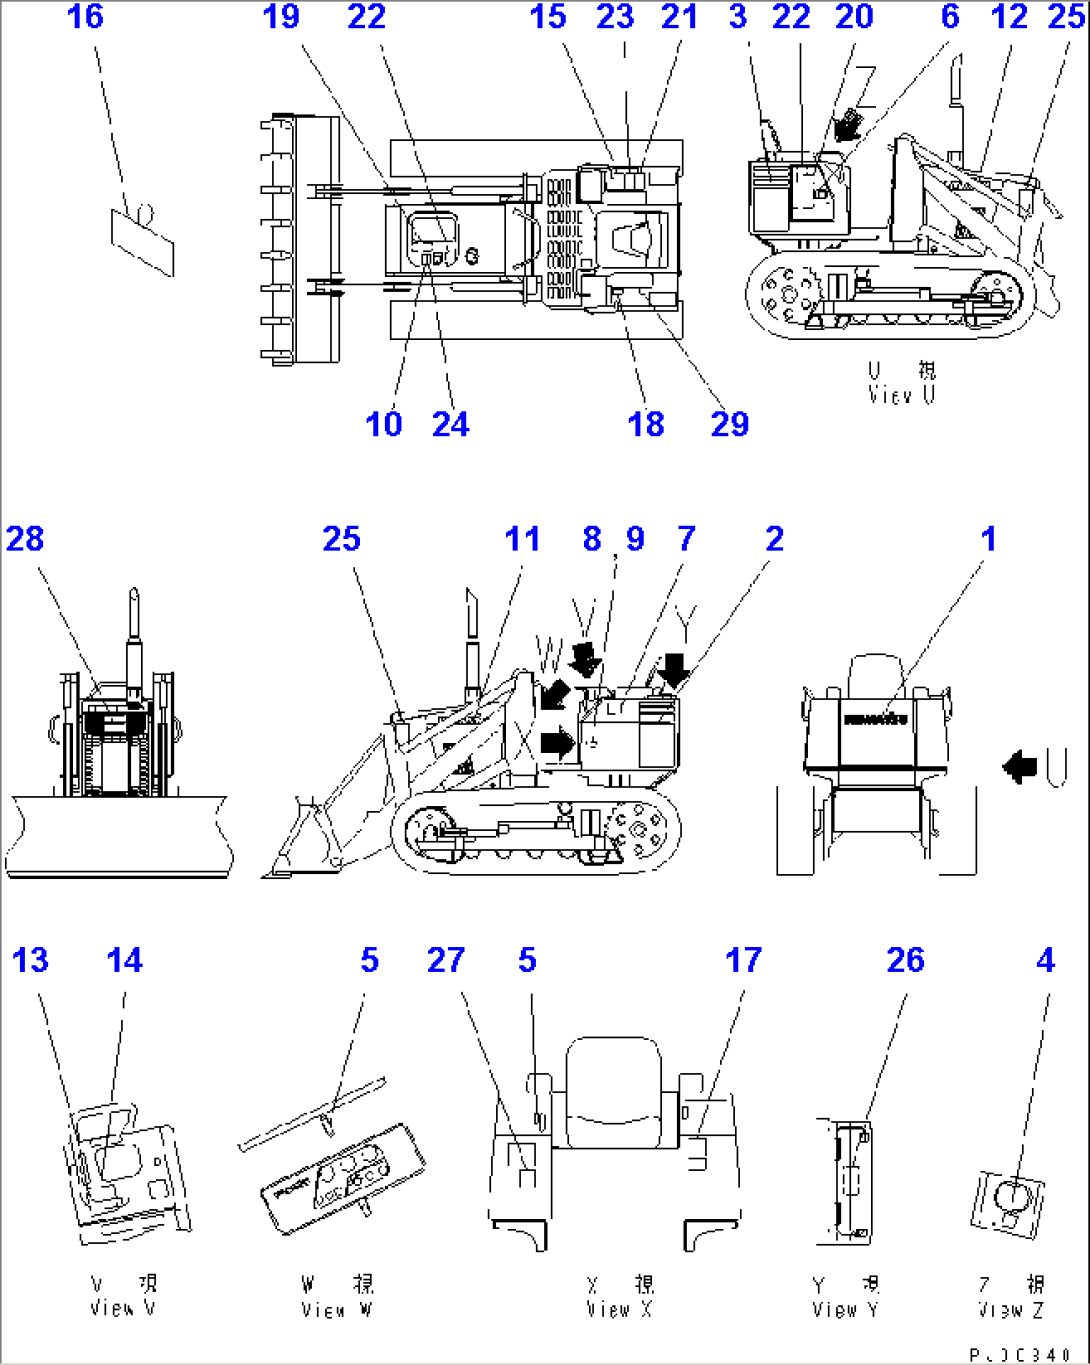 MARKS AND PLATES (JAPANESE) (FOR ROPS CAB)(#61201-)